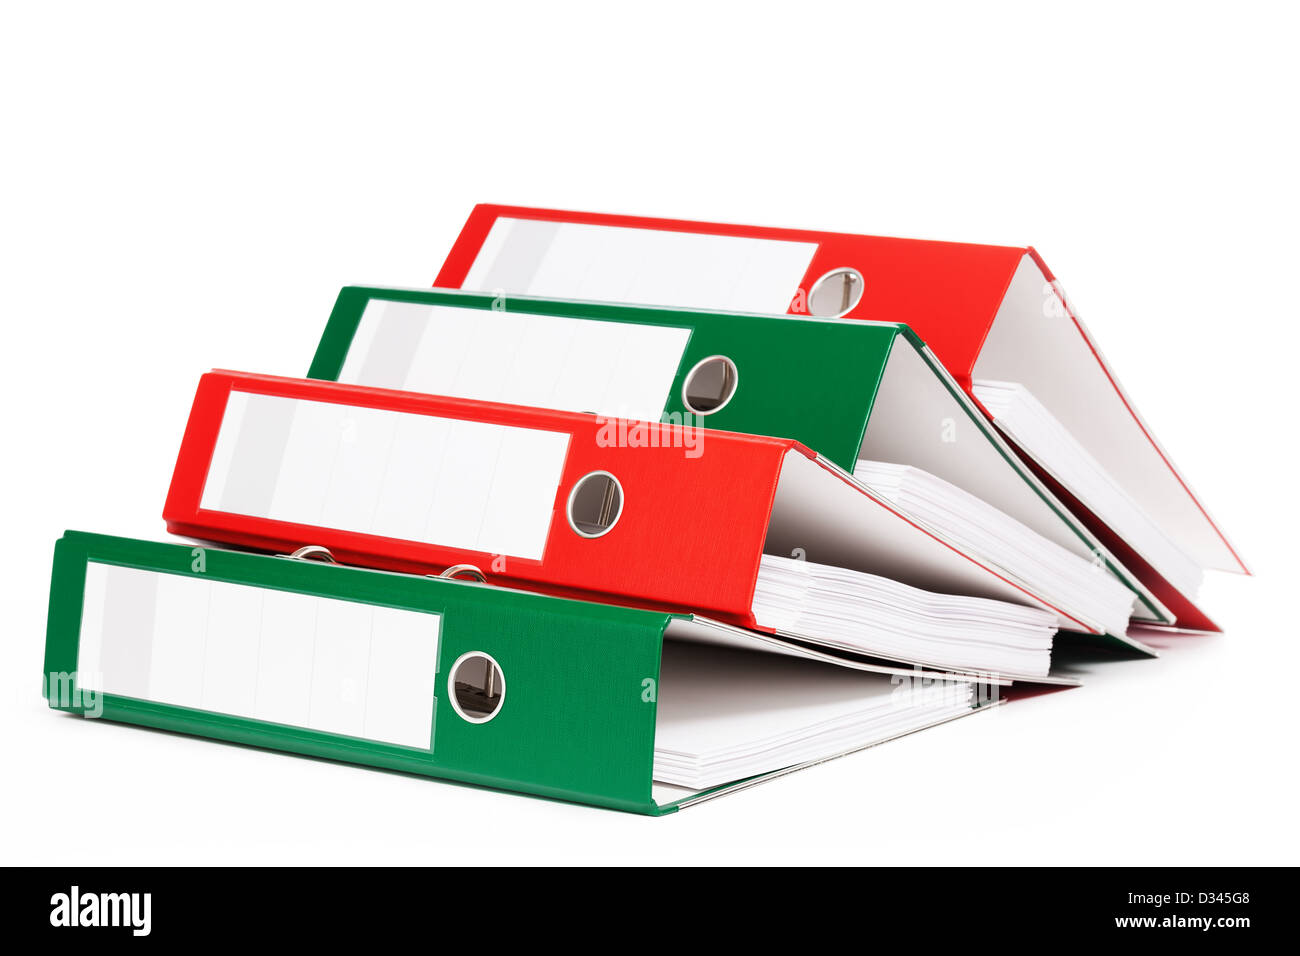 lying red and green ring binders on white background Stock Photo